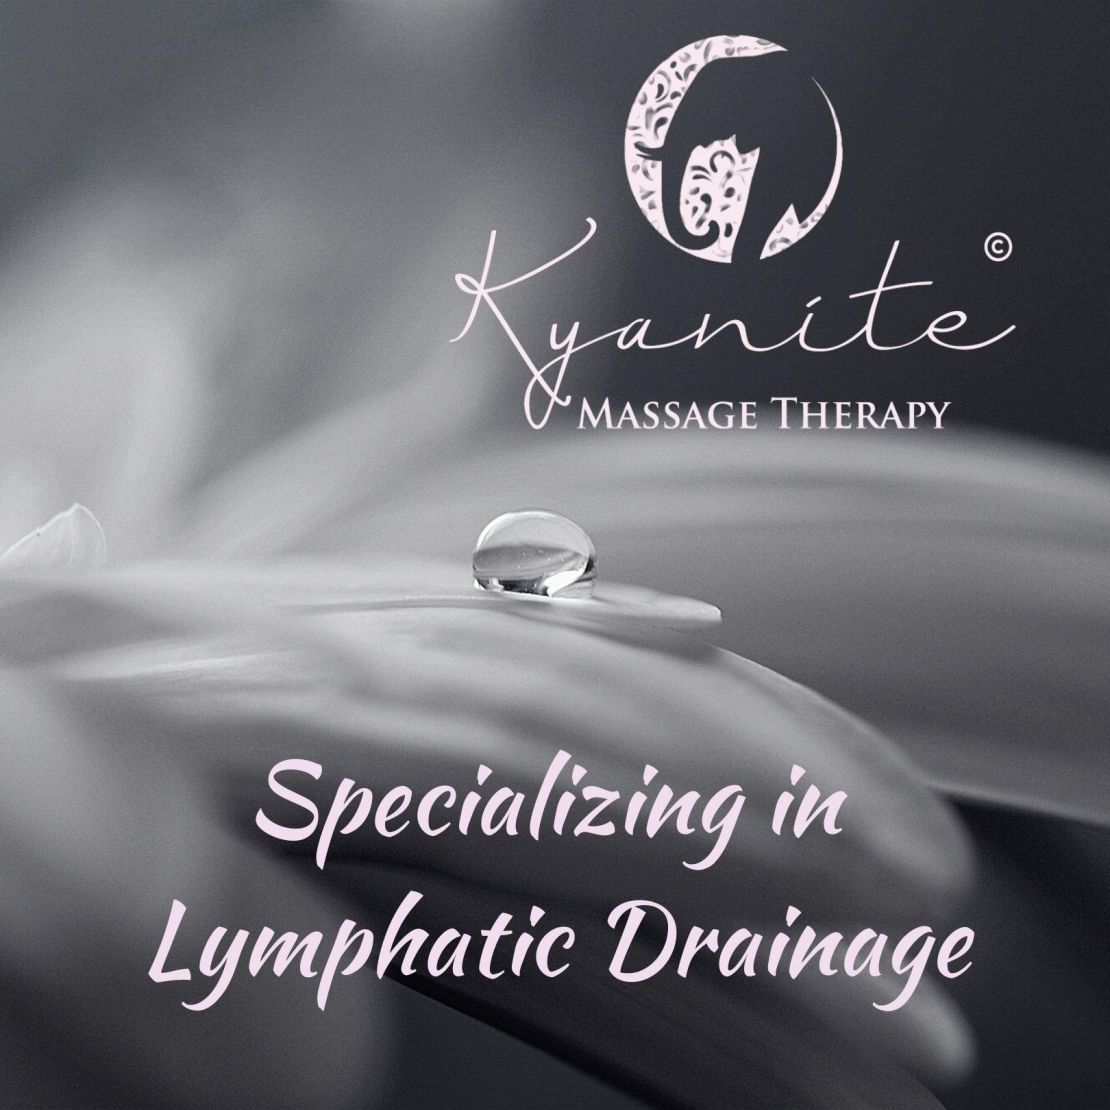 lymphatic drainage, lymphedema,plastic surgery